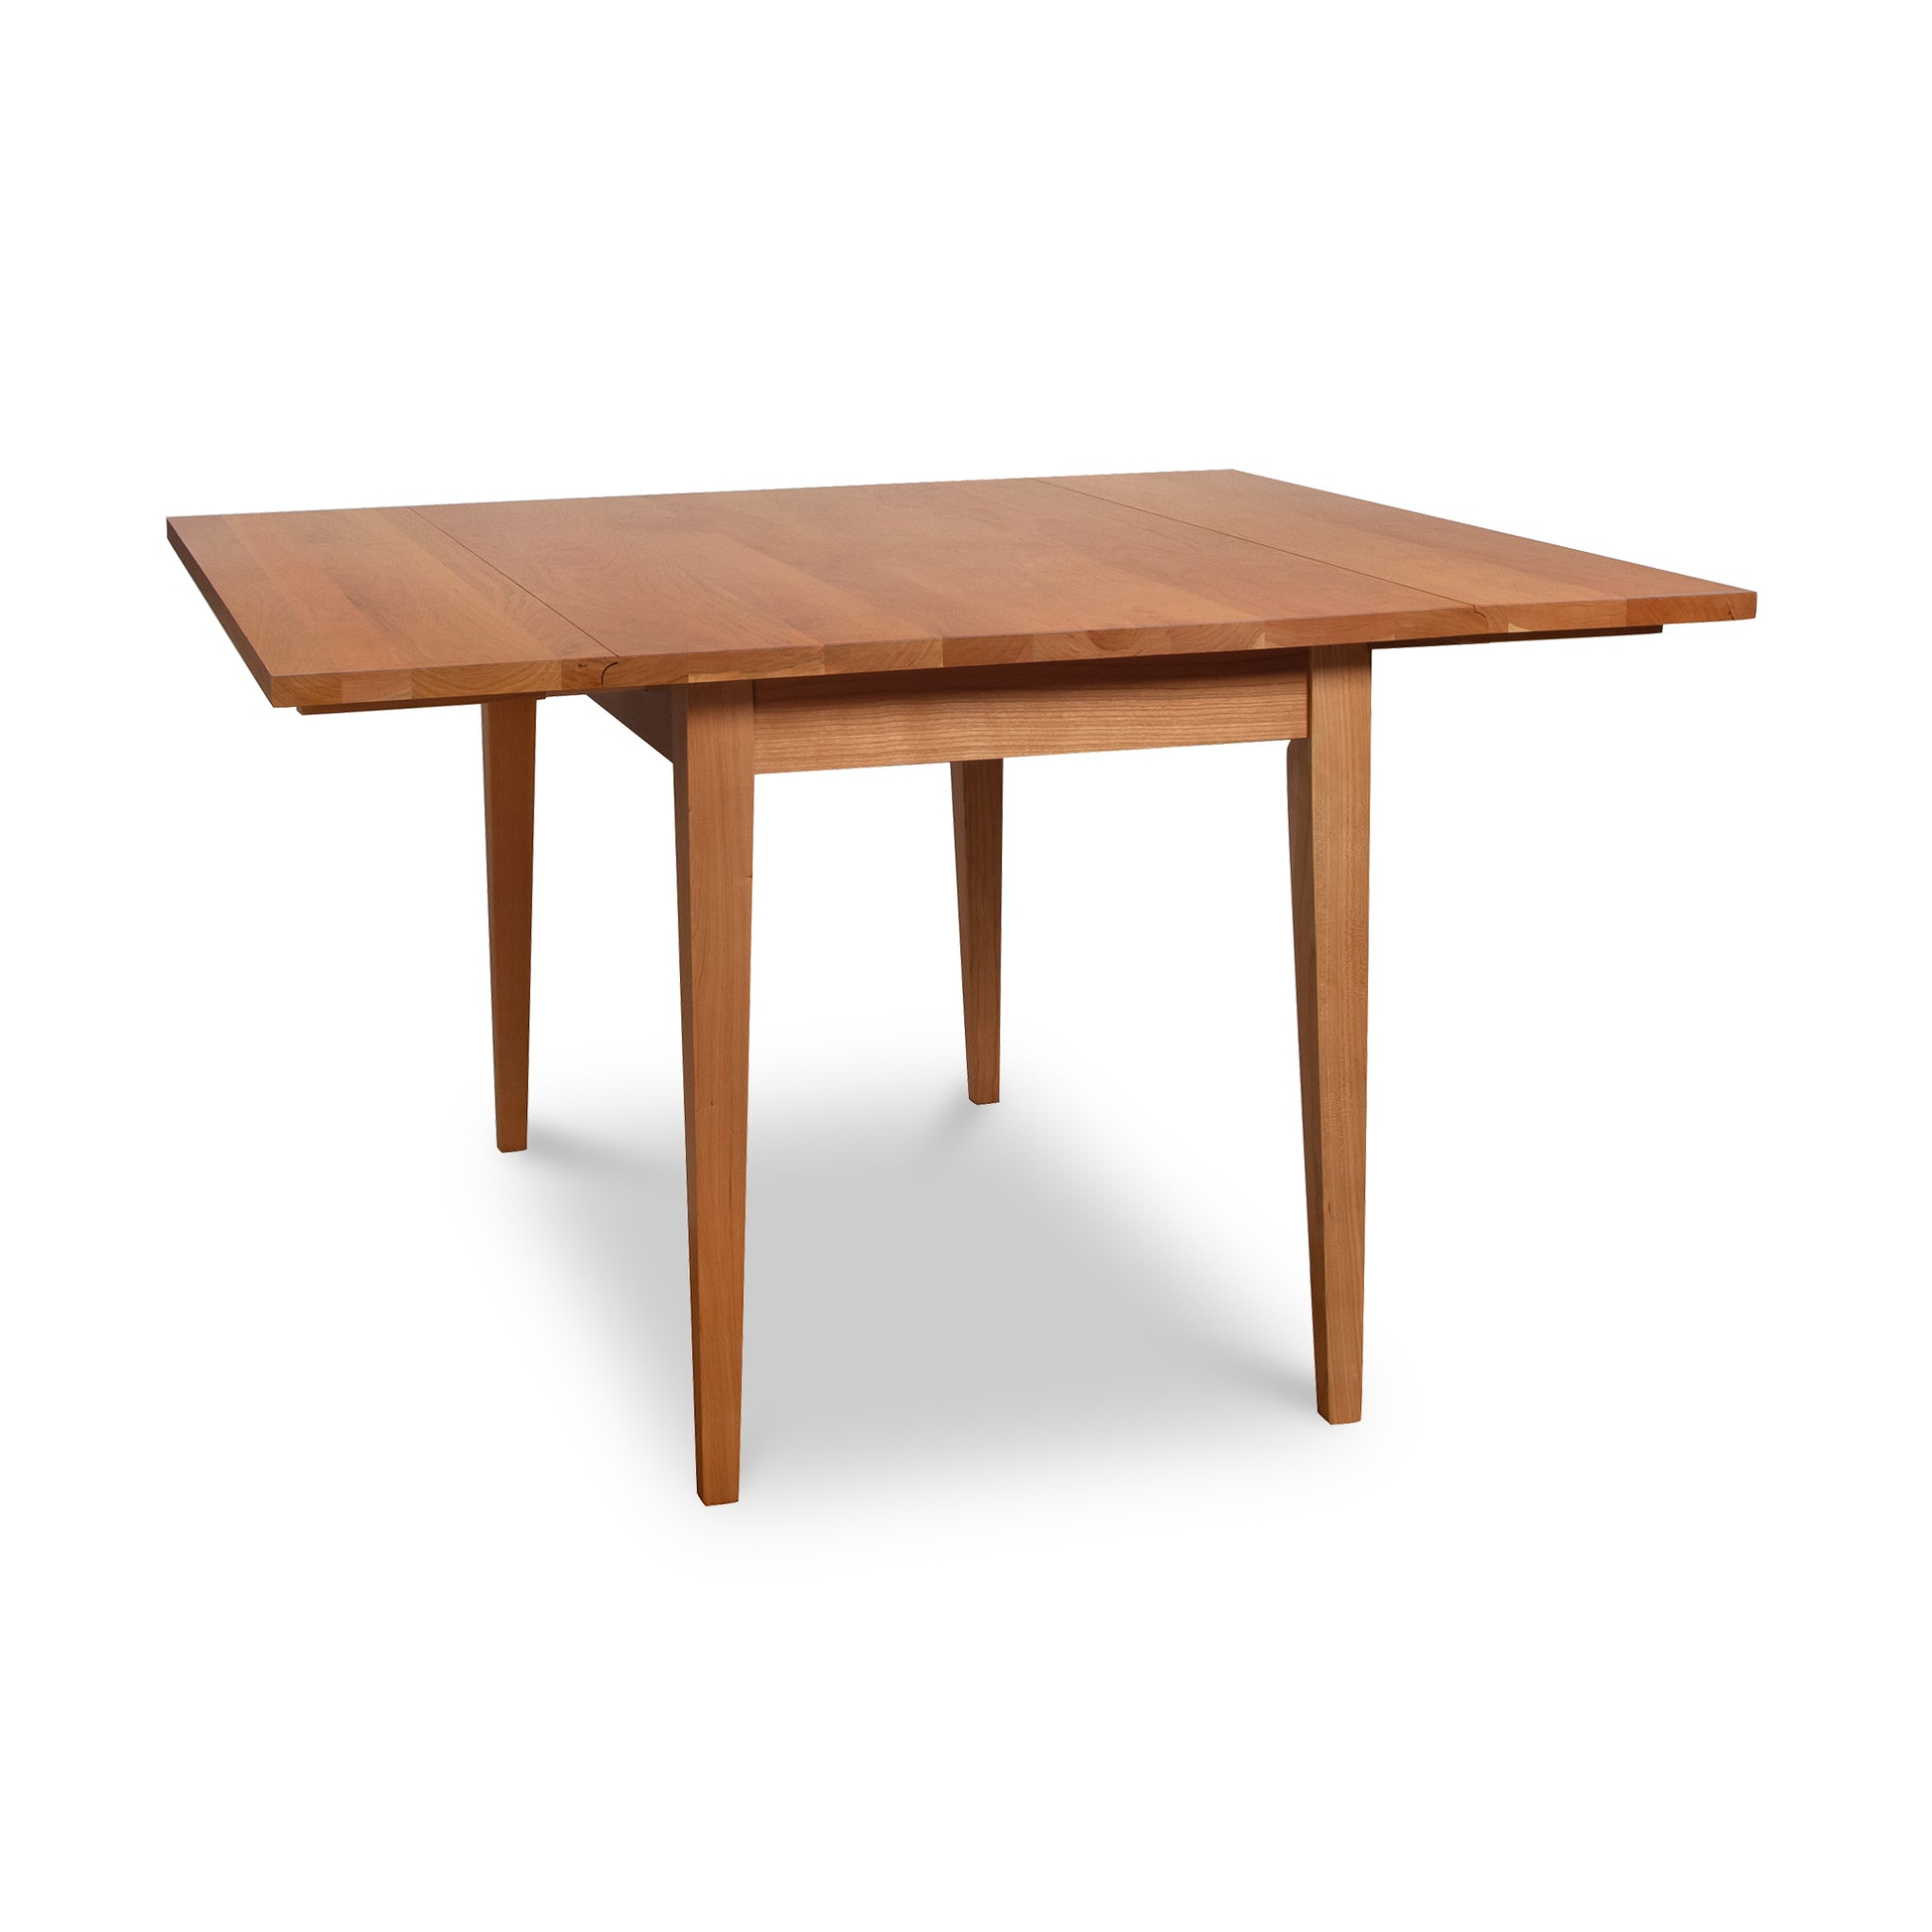 A kitchen or dining room Lyndon Furniture square drop leaf table with a wooden top and legs, perfect for family gatherings.